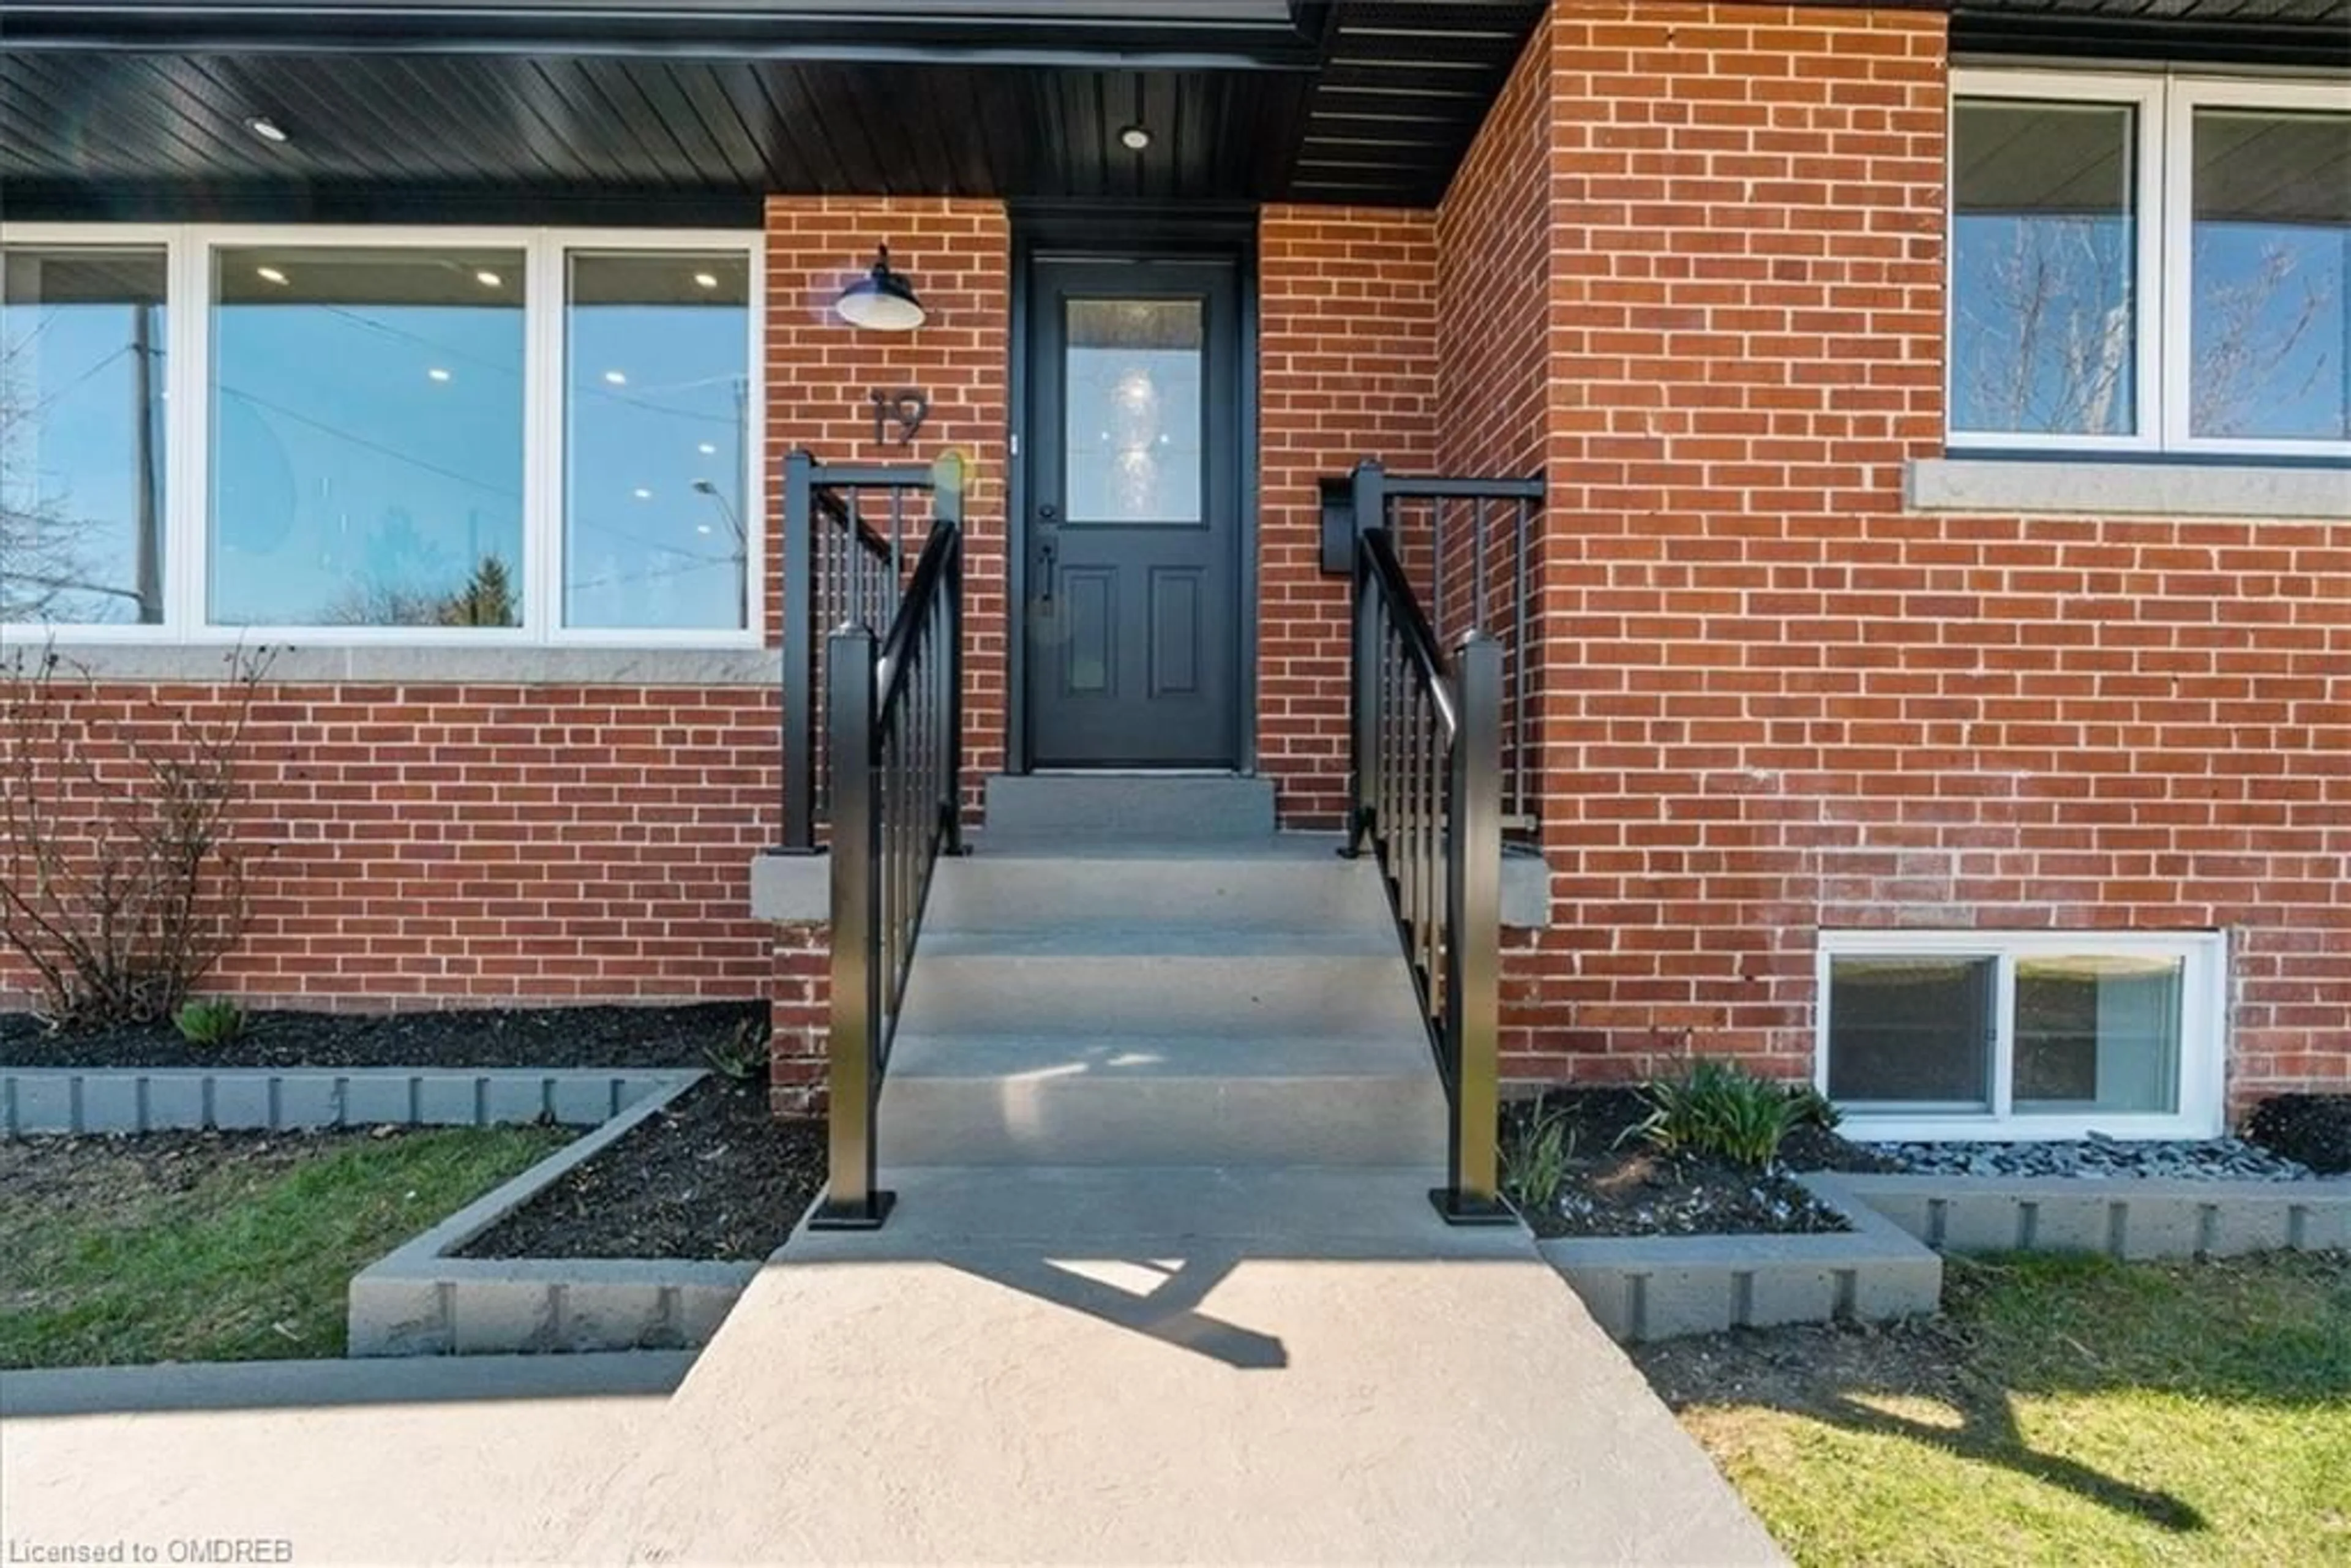 Home with brick exterior material for 19 Rayside Dr, Toronto Ontario M9C 1S7